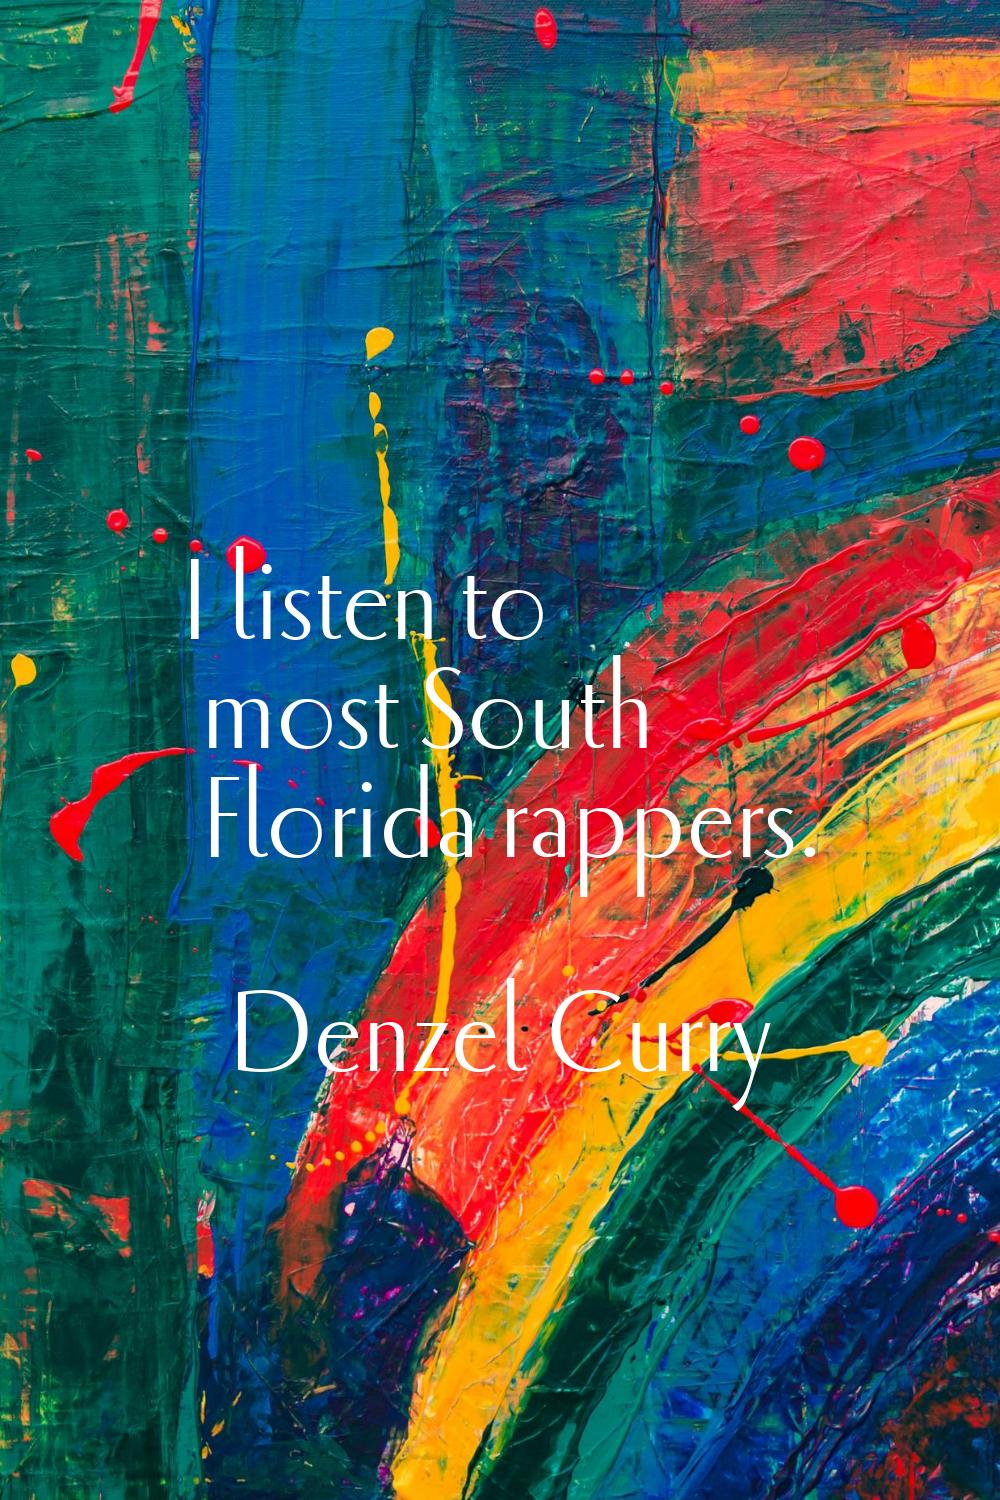 I listen to most South Florida rappers.